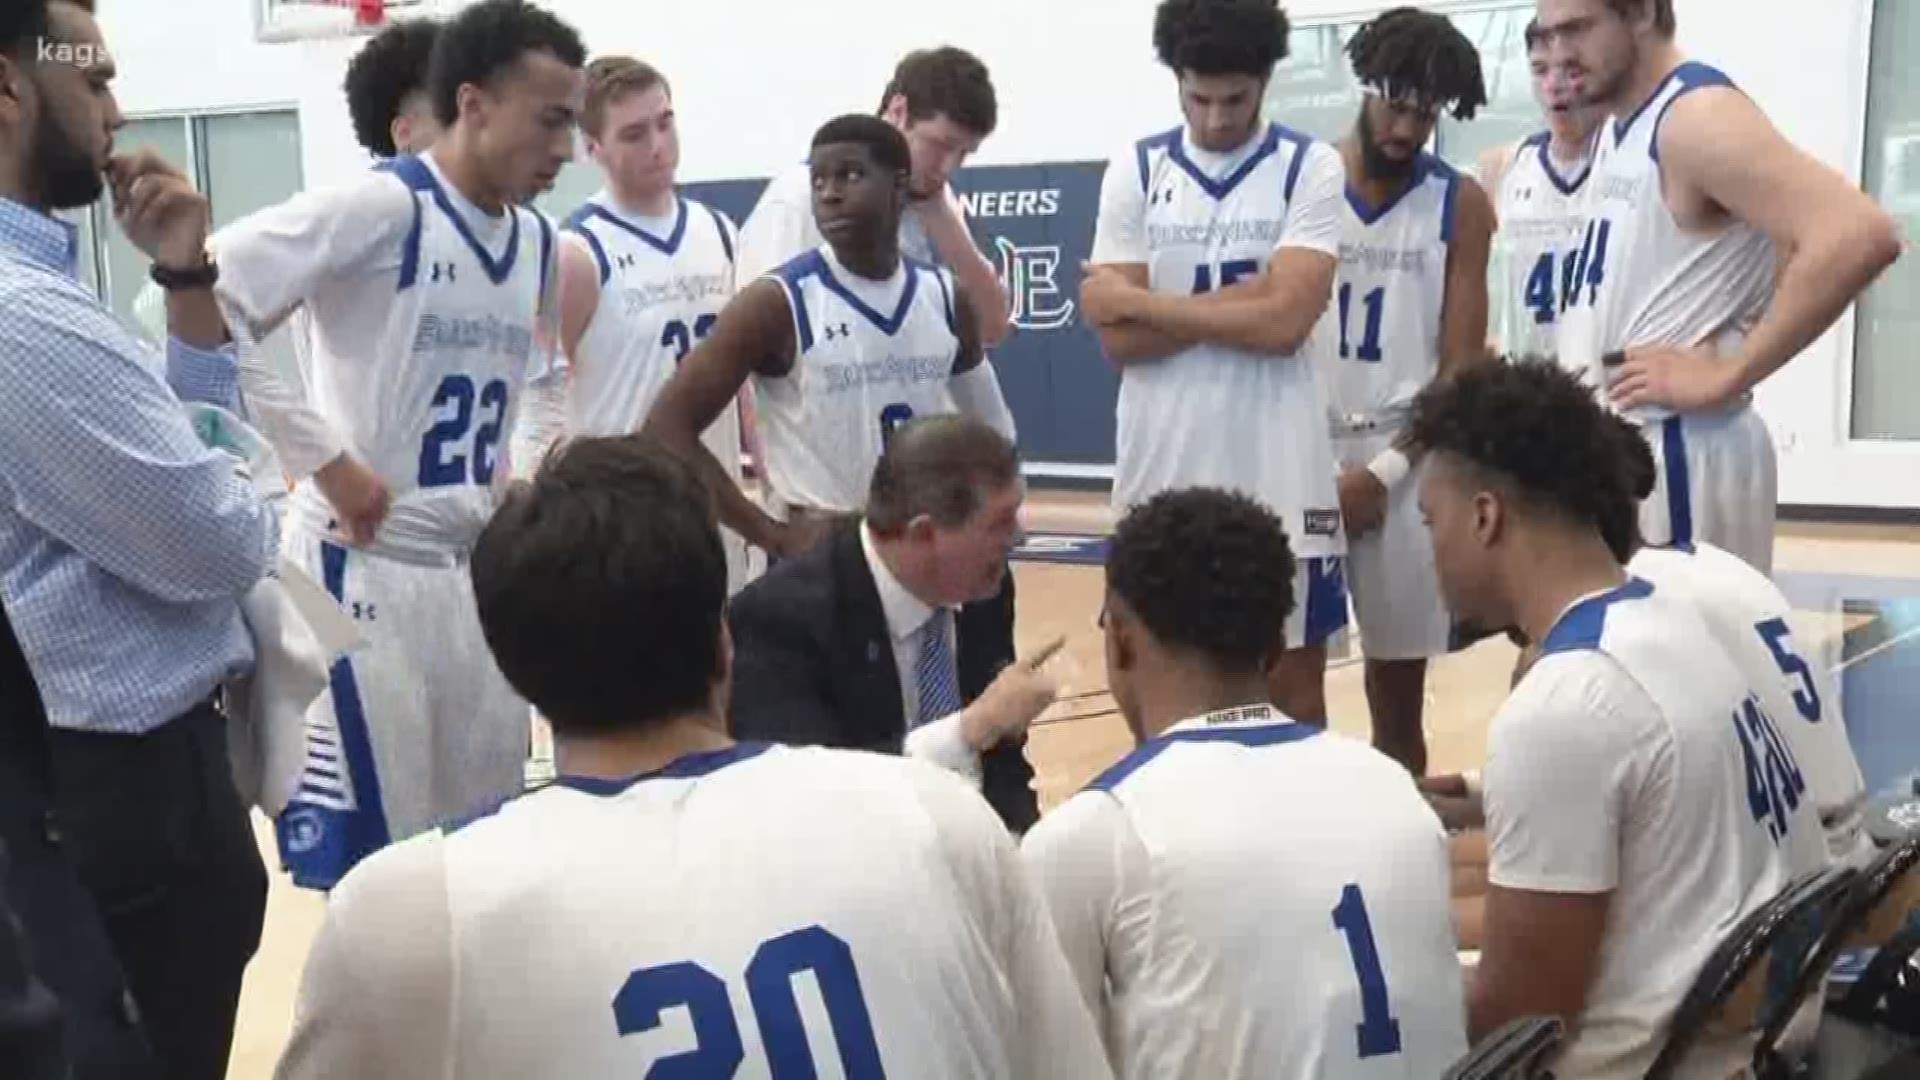 The Blinn men's basketball team lost to Bossier Parish on Saturday afternoon by a score of 71-65.